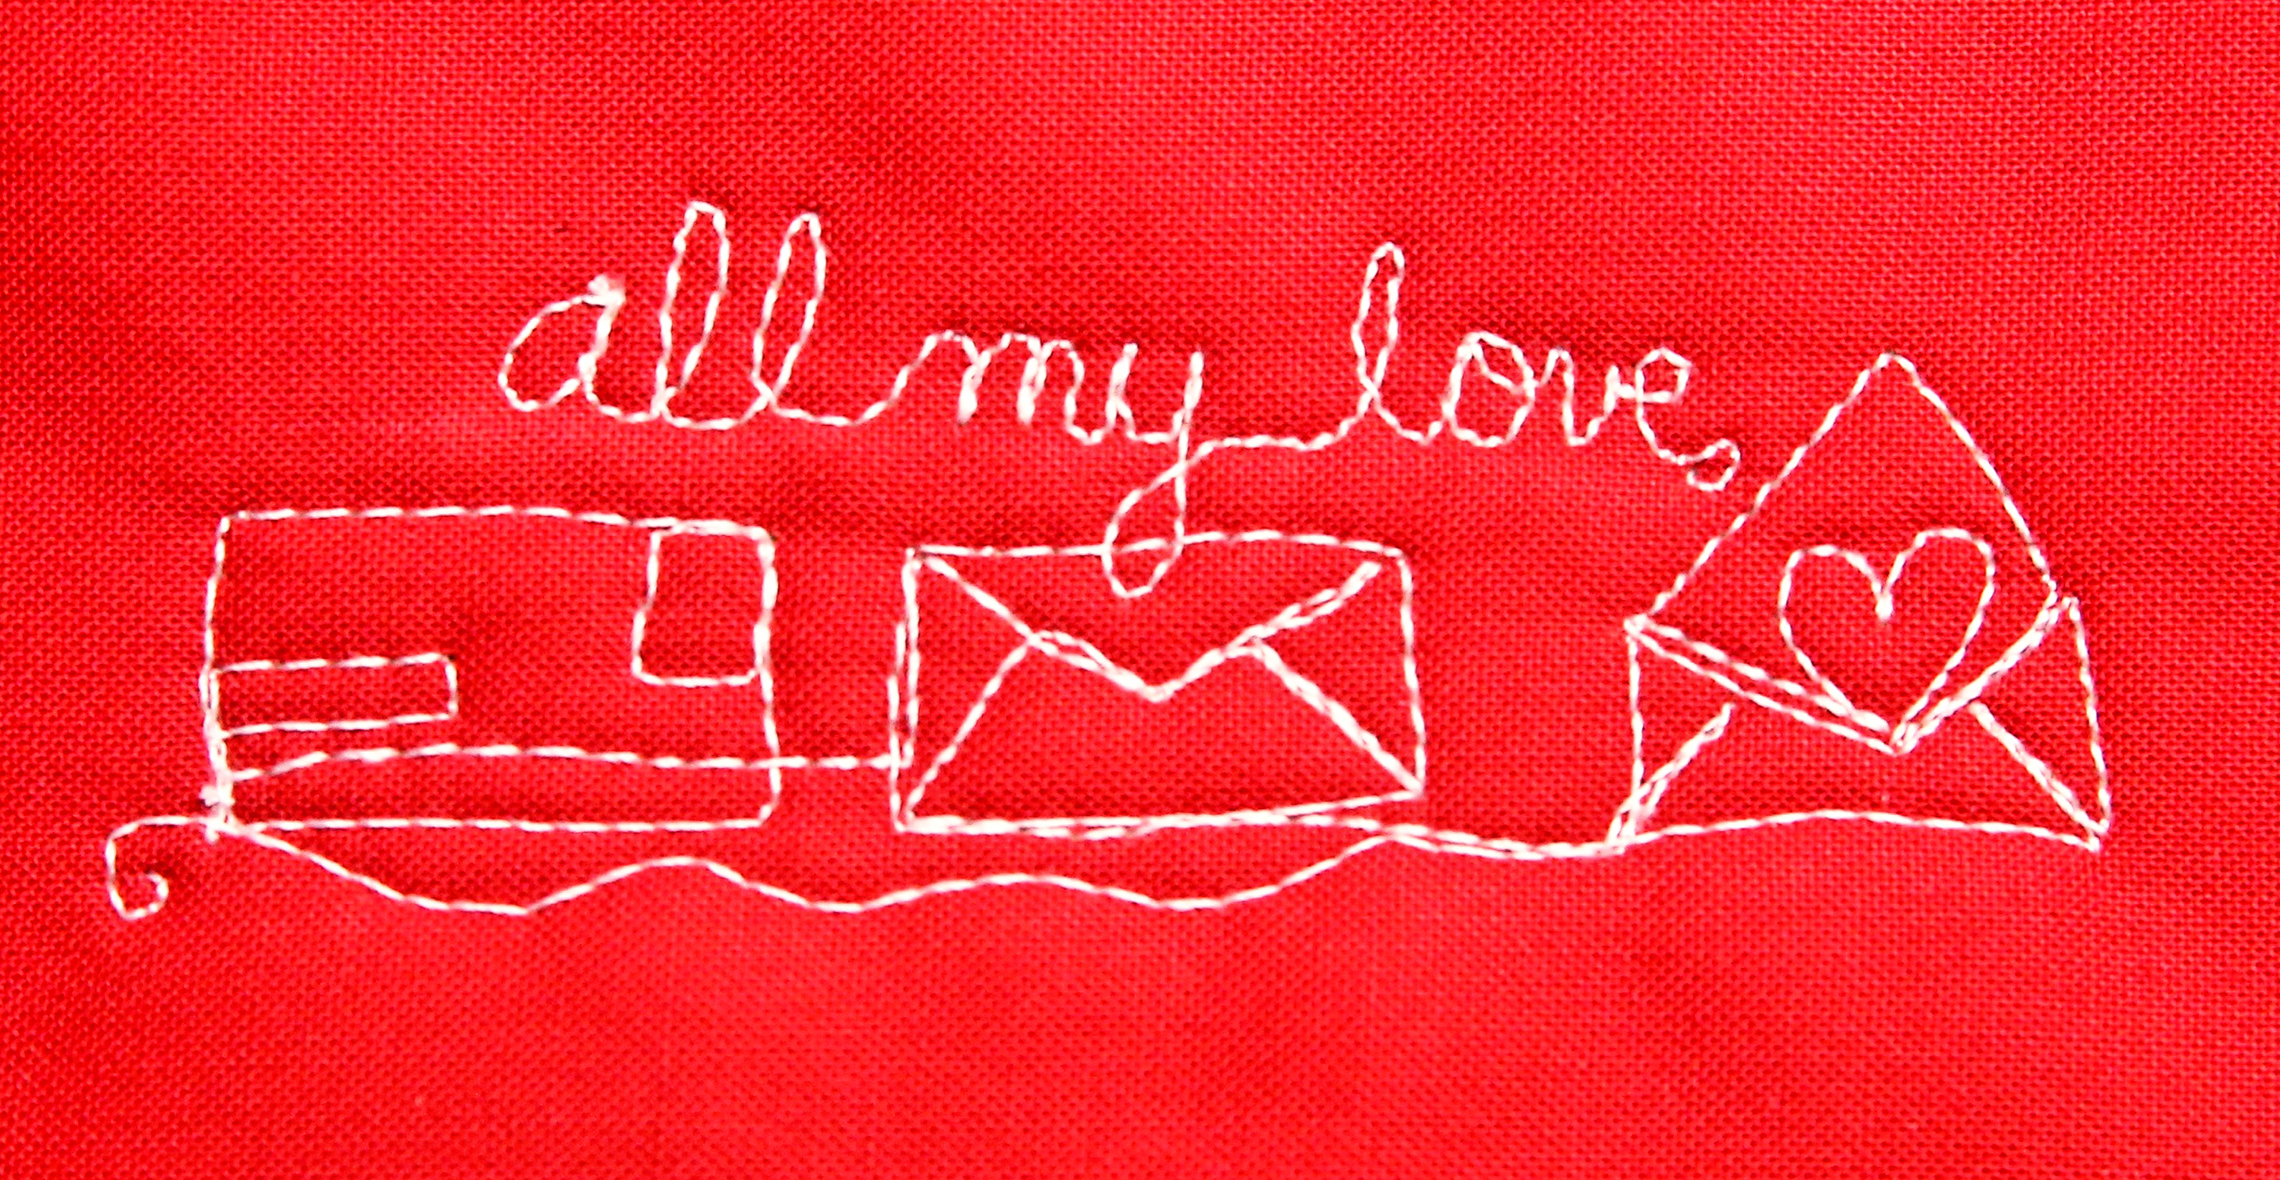 How to free-motion quilt a love letter